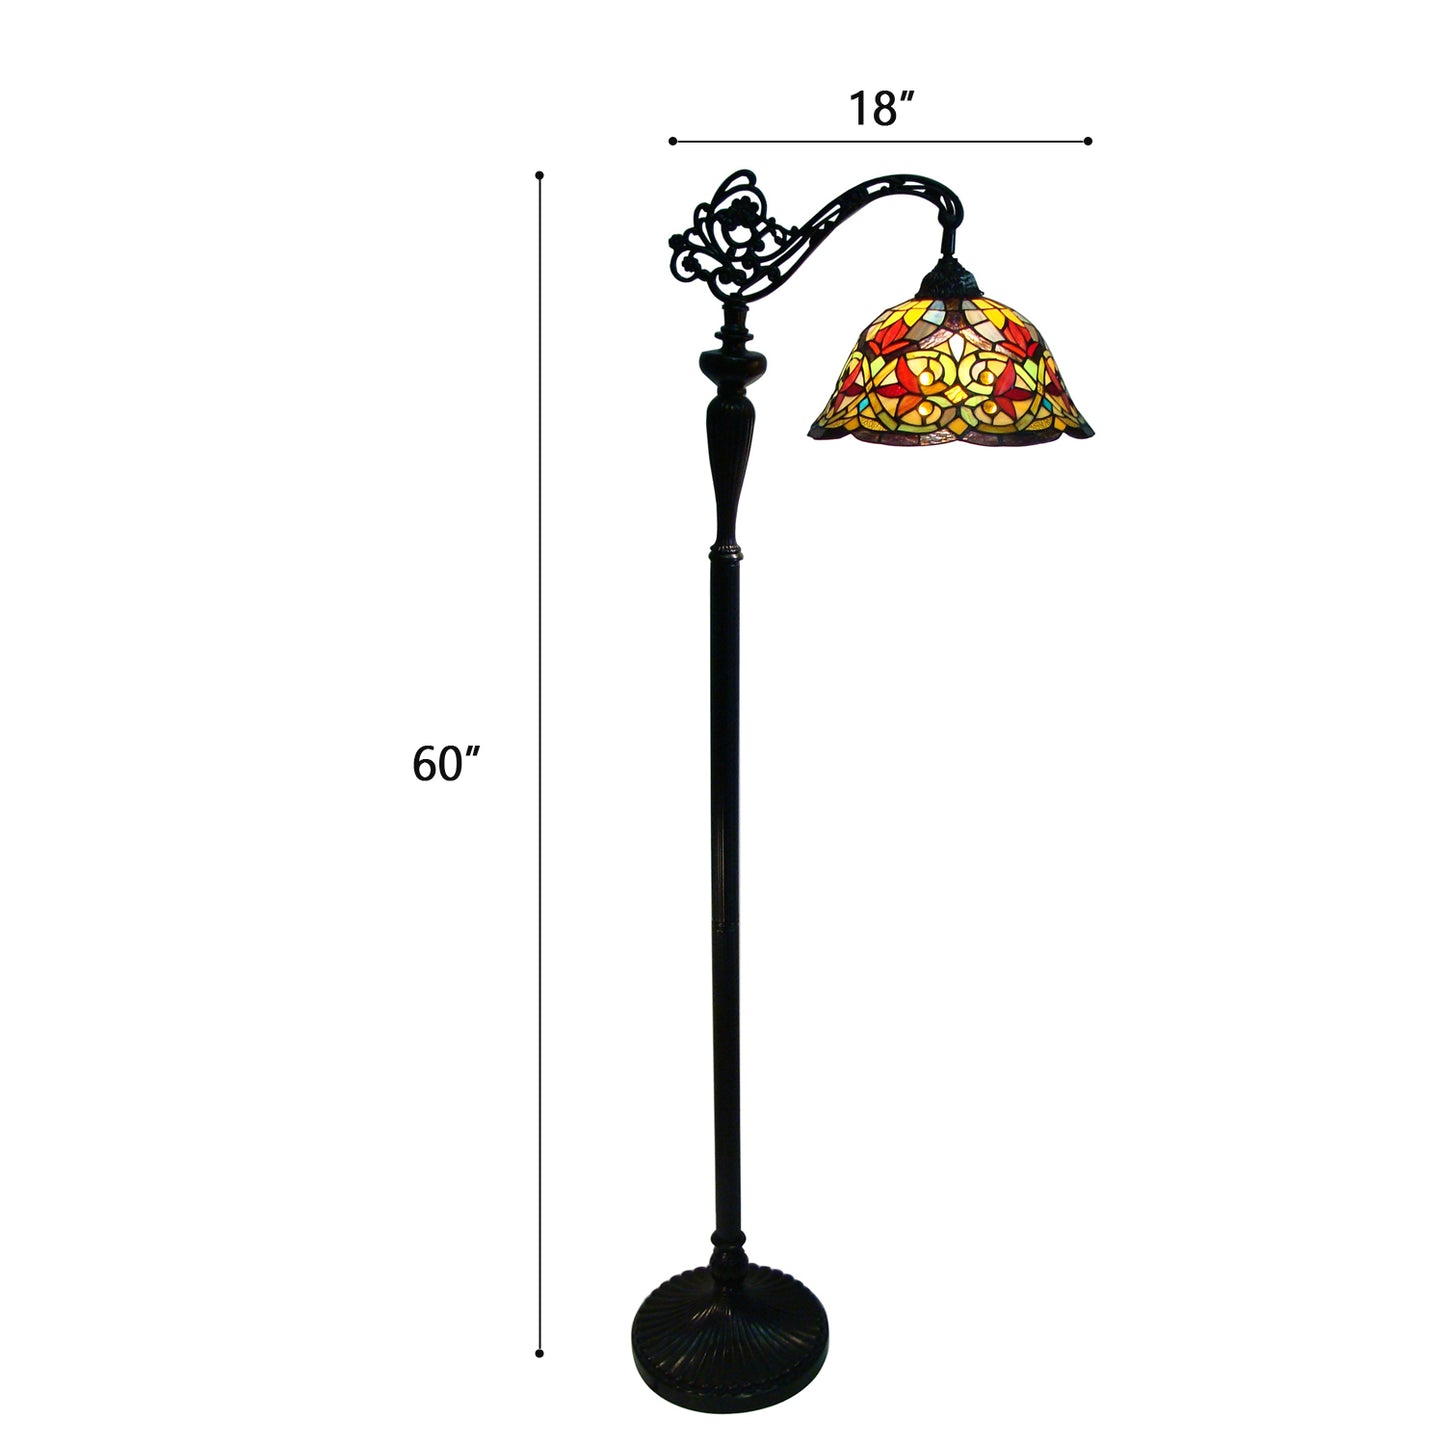 Verona Tiffany Style Stained Glass Arched Floor Lamp, F1220